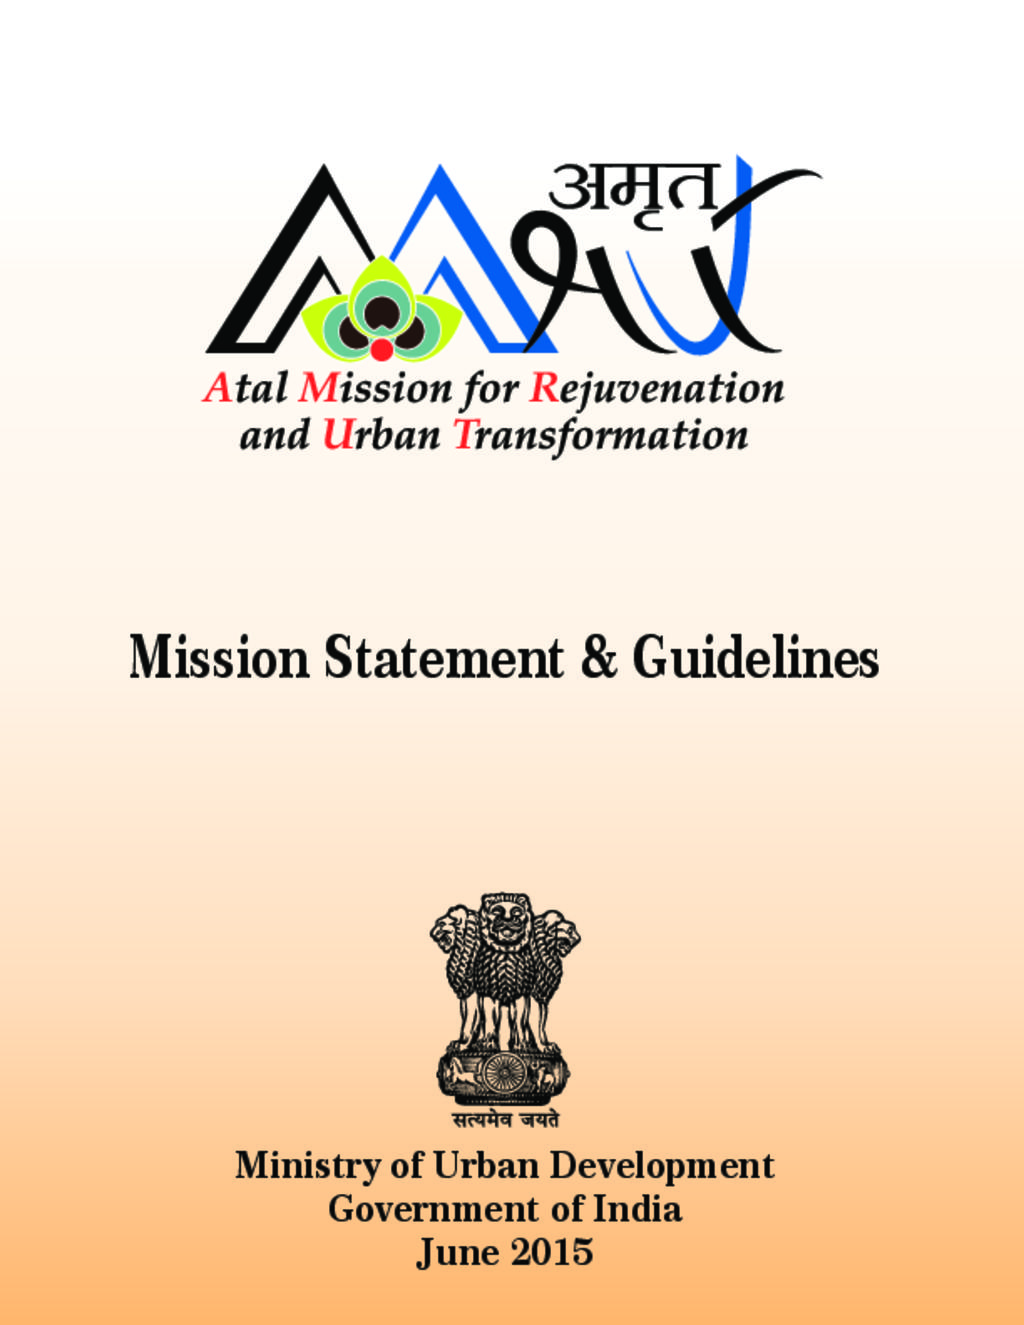 AMRUT Mission Statement and Guidelines